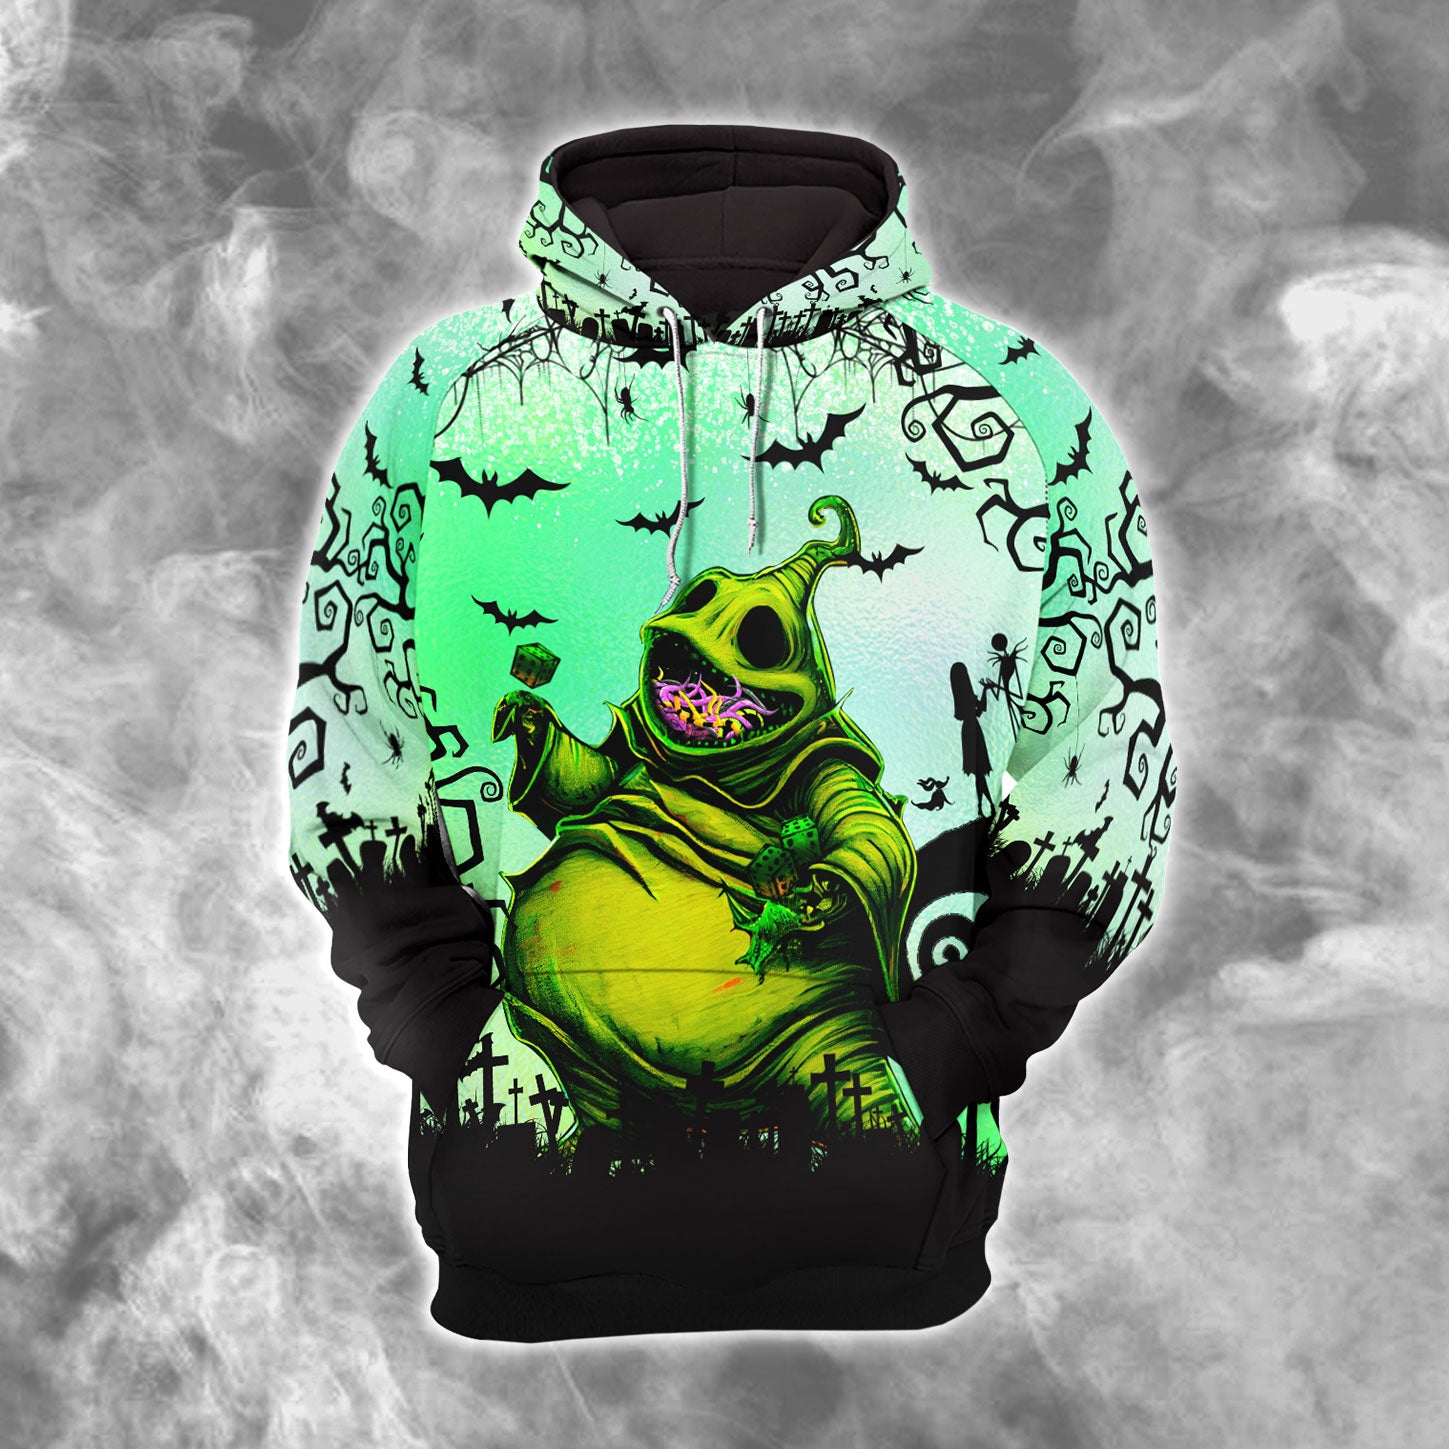 Green Nightmare Theme Art Combo Hoodie and Leggings - Dark and edgy matching set with skull designs for a unique and stylish look